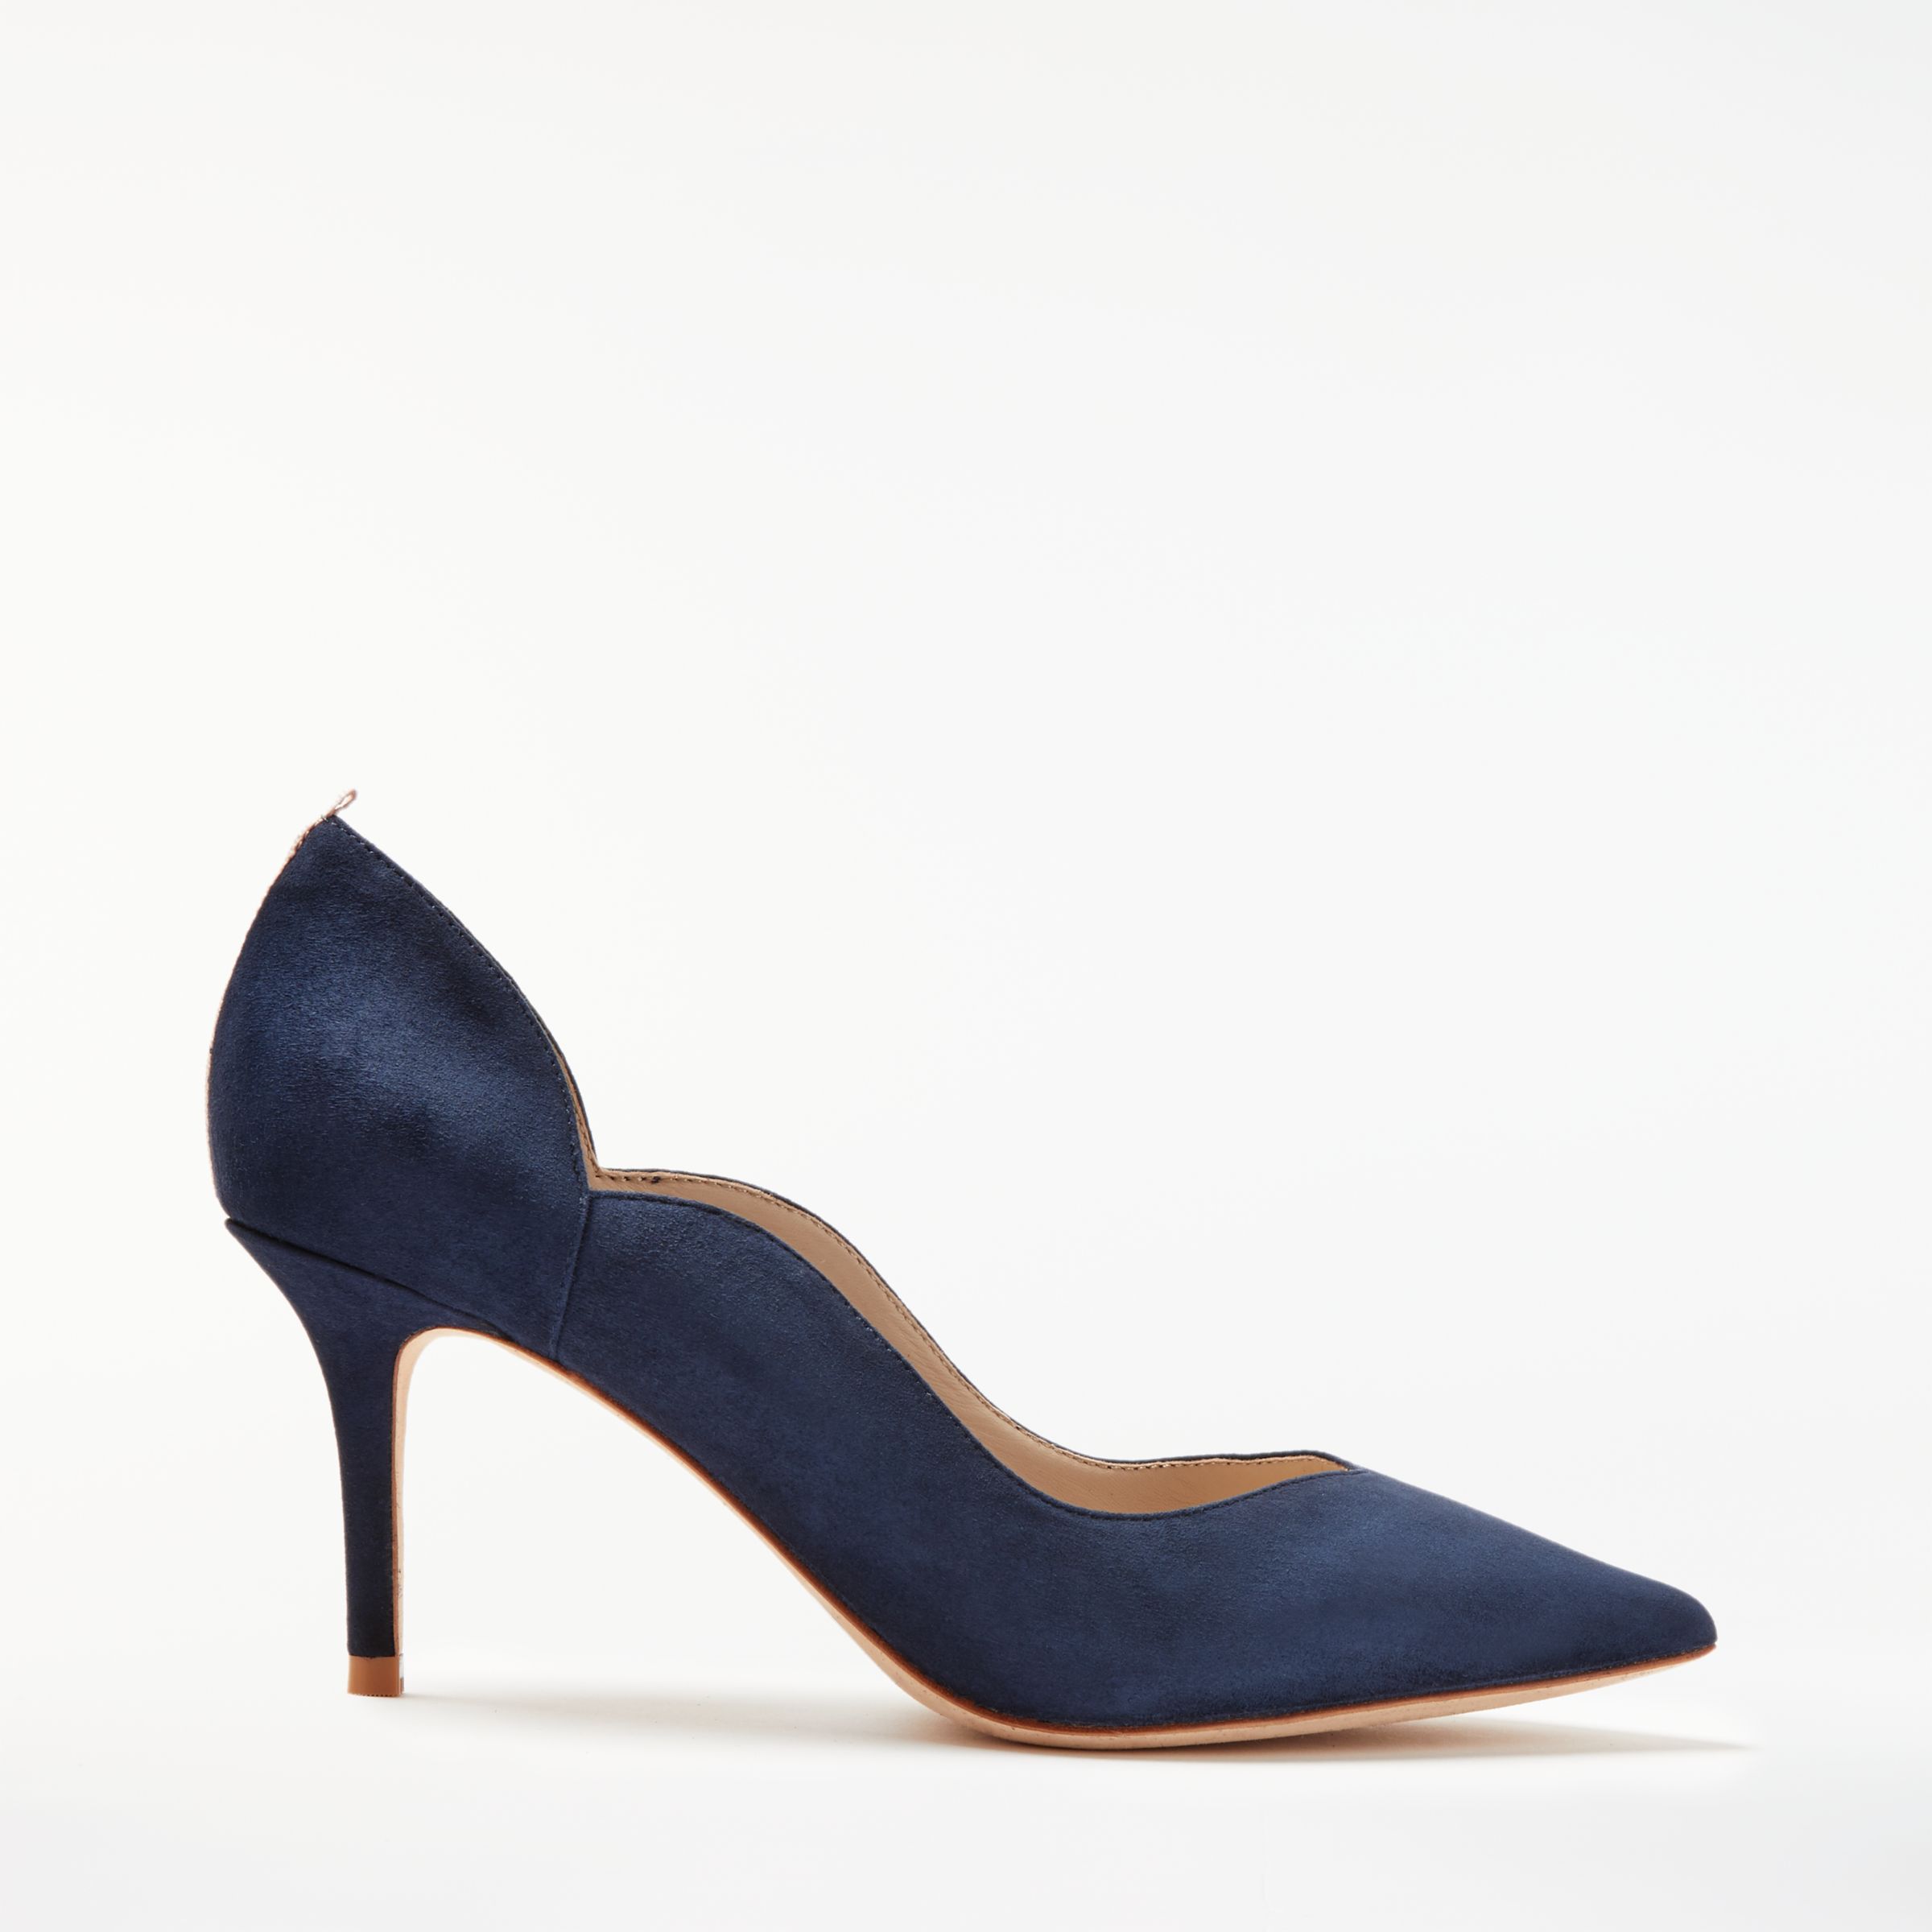 Boden Madison Stiletto Heeled Court Shoes, Navy Suede